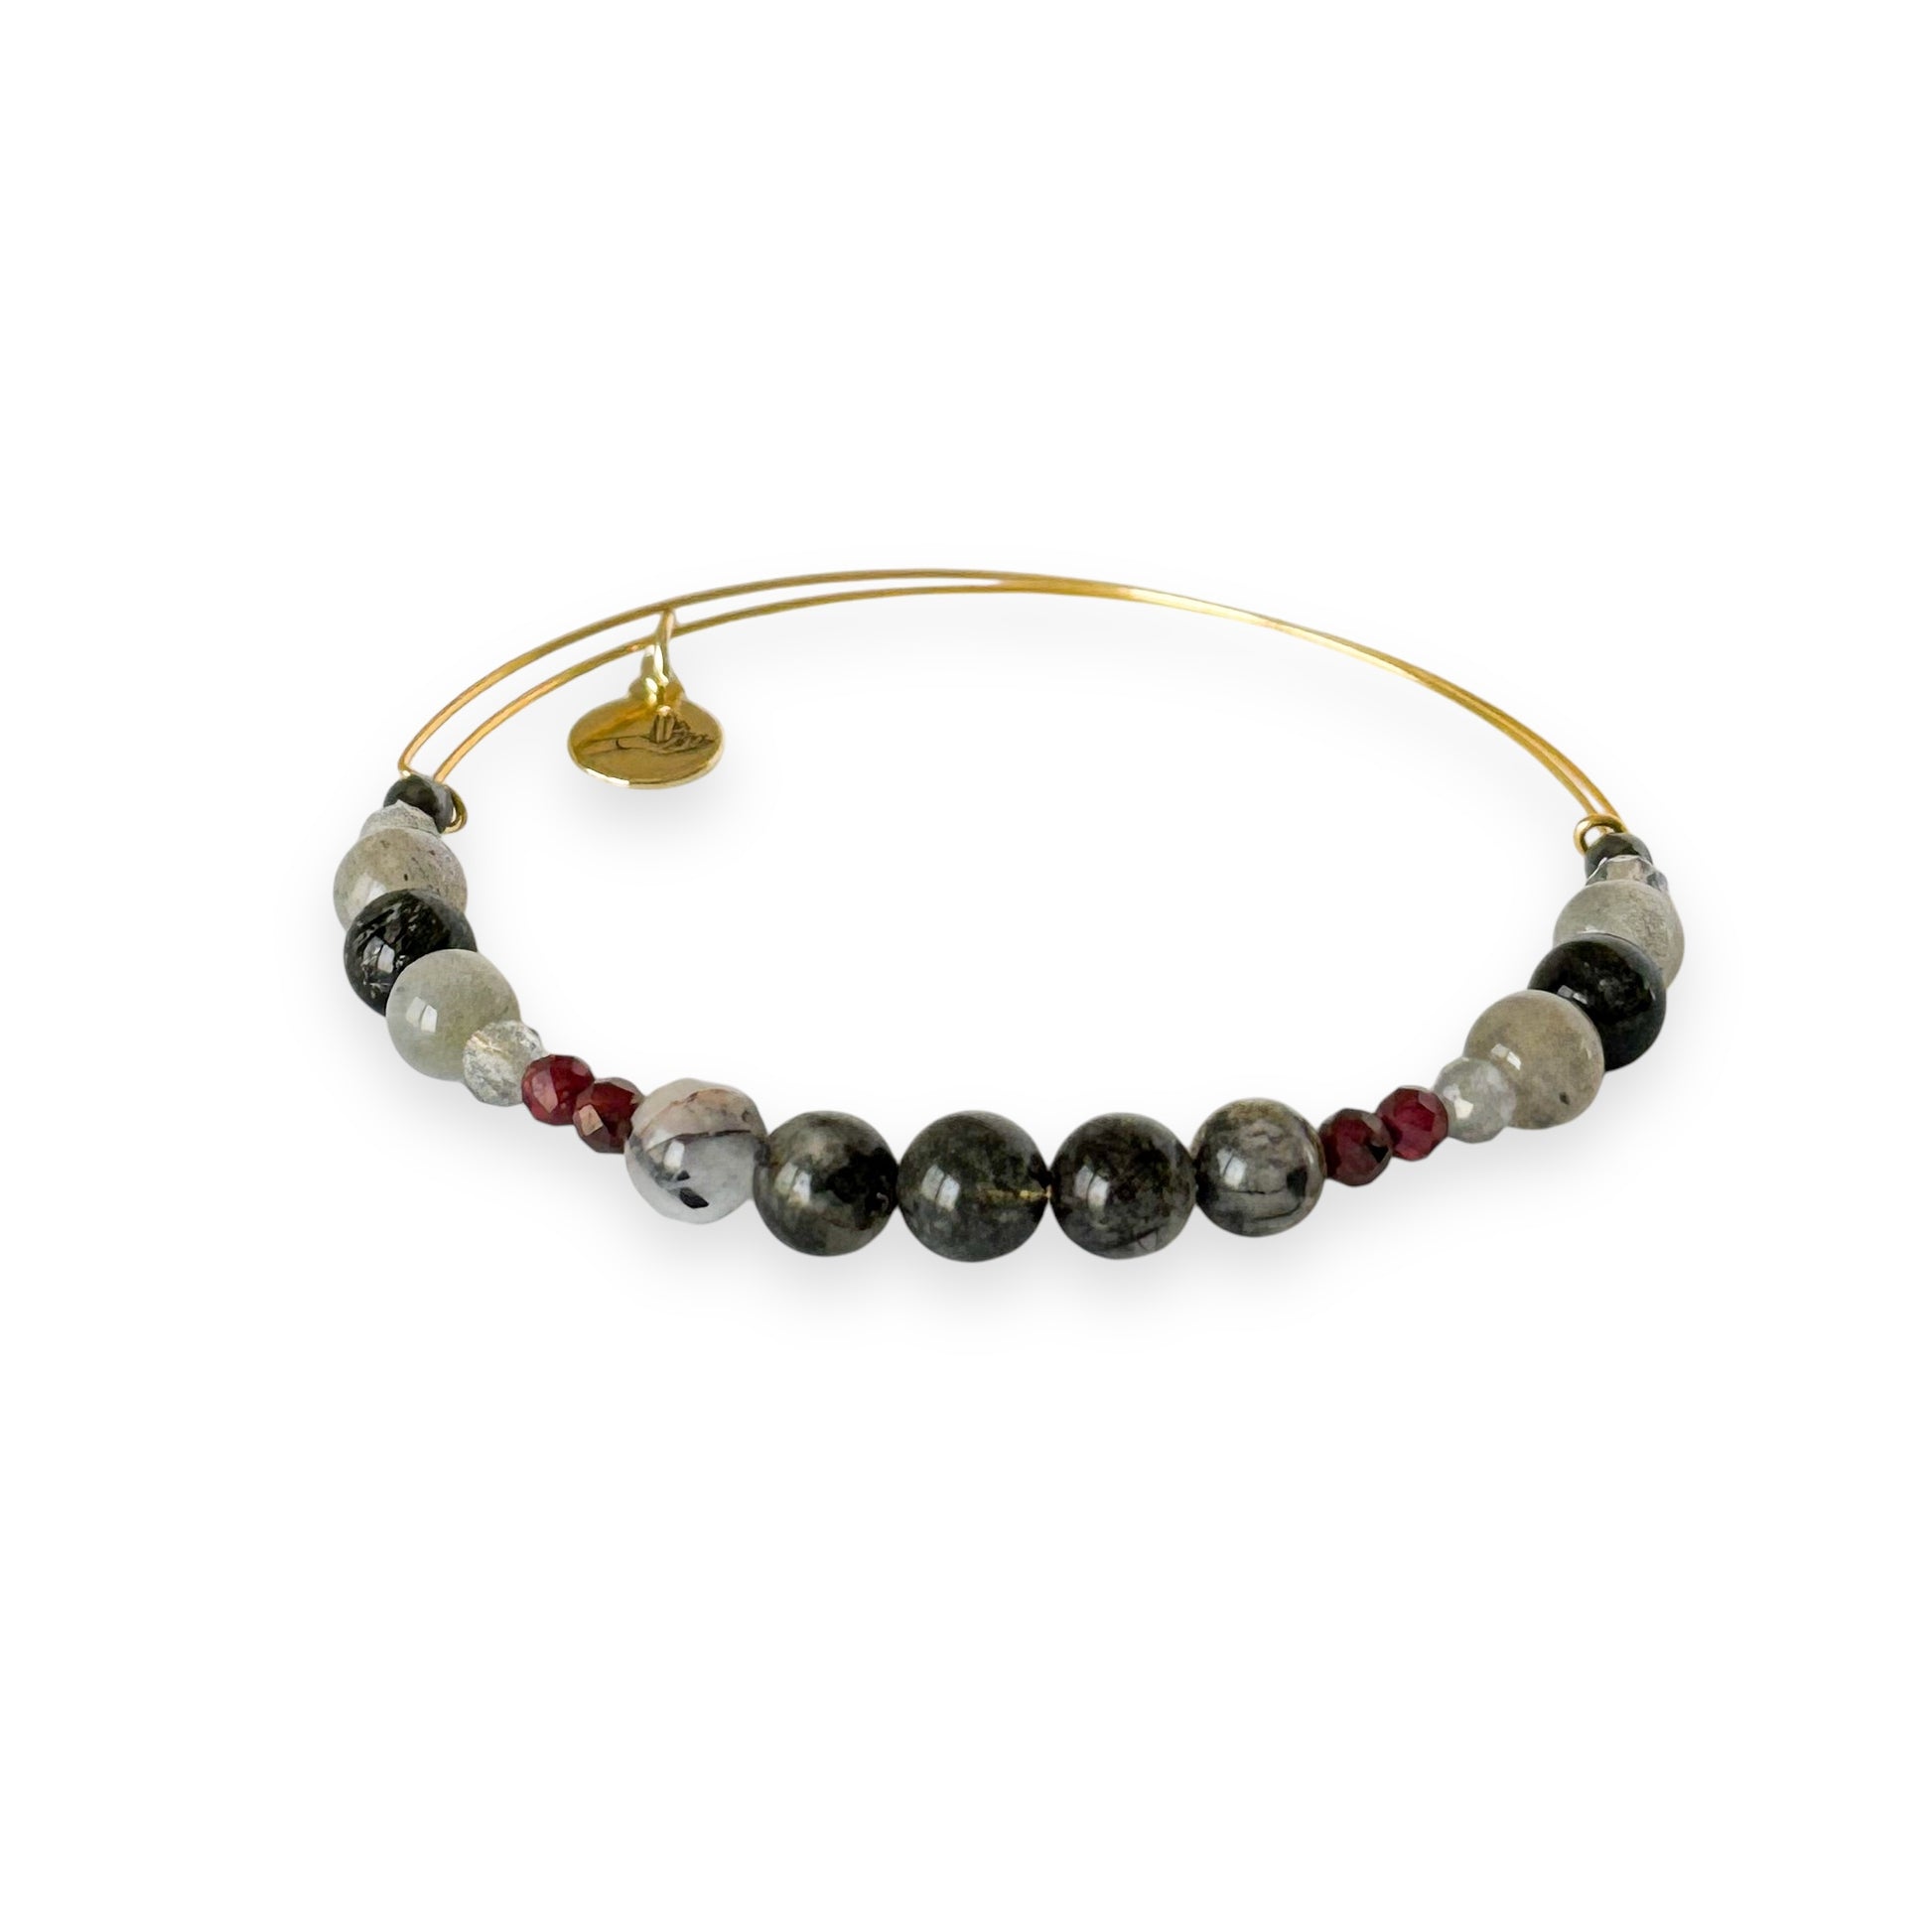 Handcrafted bracelet featuring Red Garnet and Labradorite